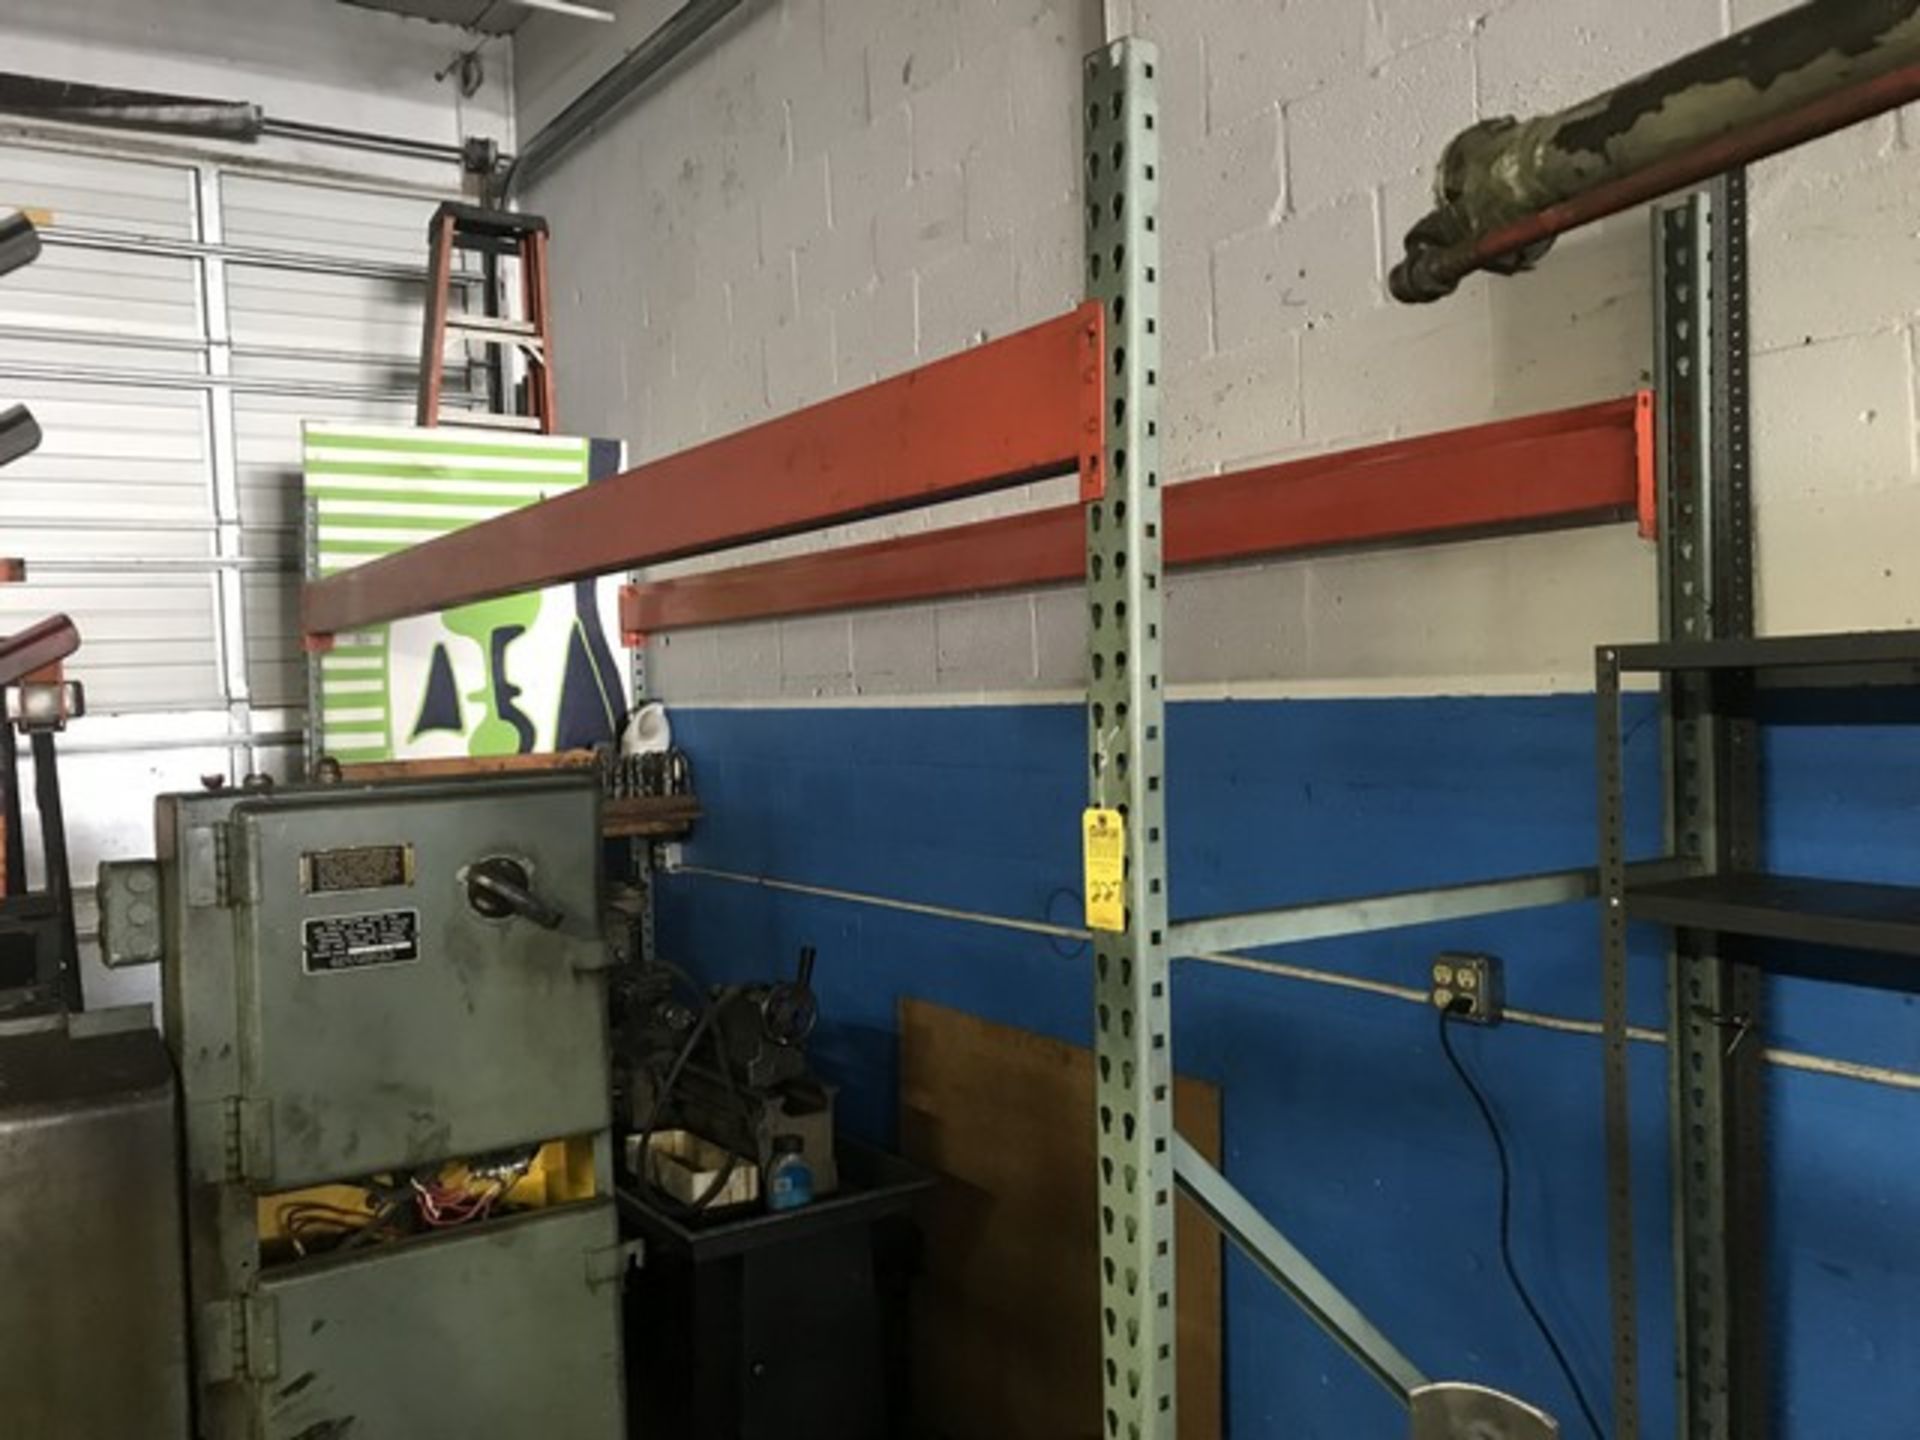 SECTION PALLET RACKING - 2- 8' UPRIGHTS / 2- 12' CROSSBEAMS